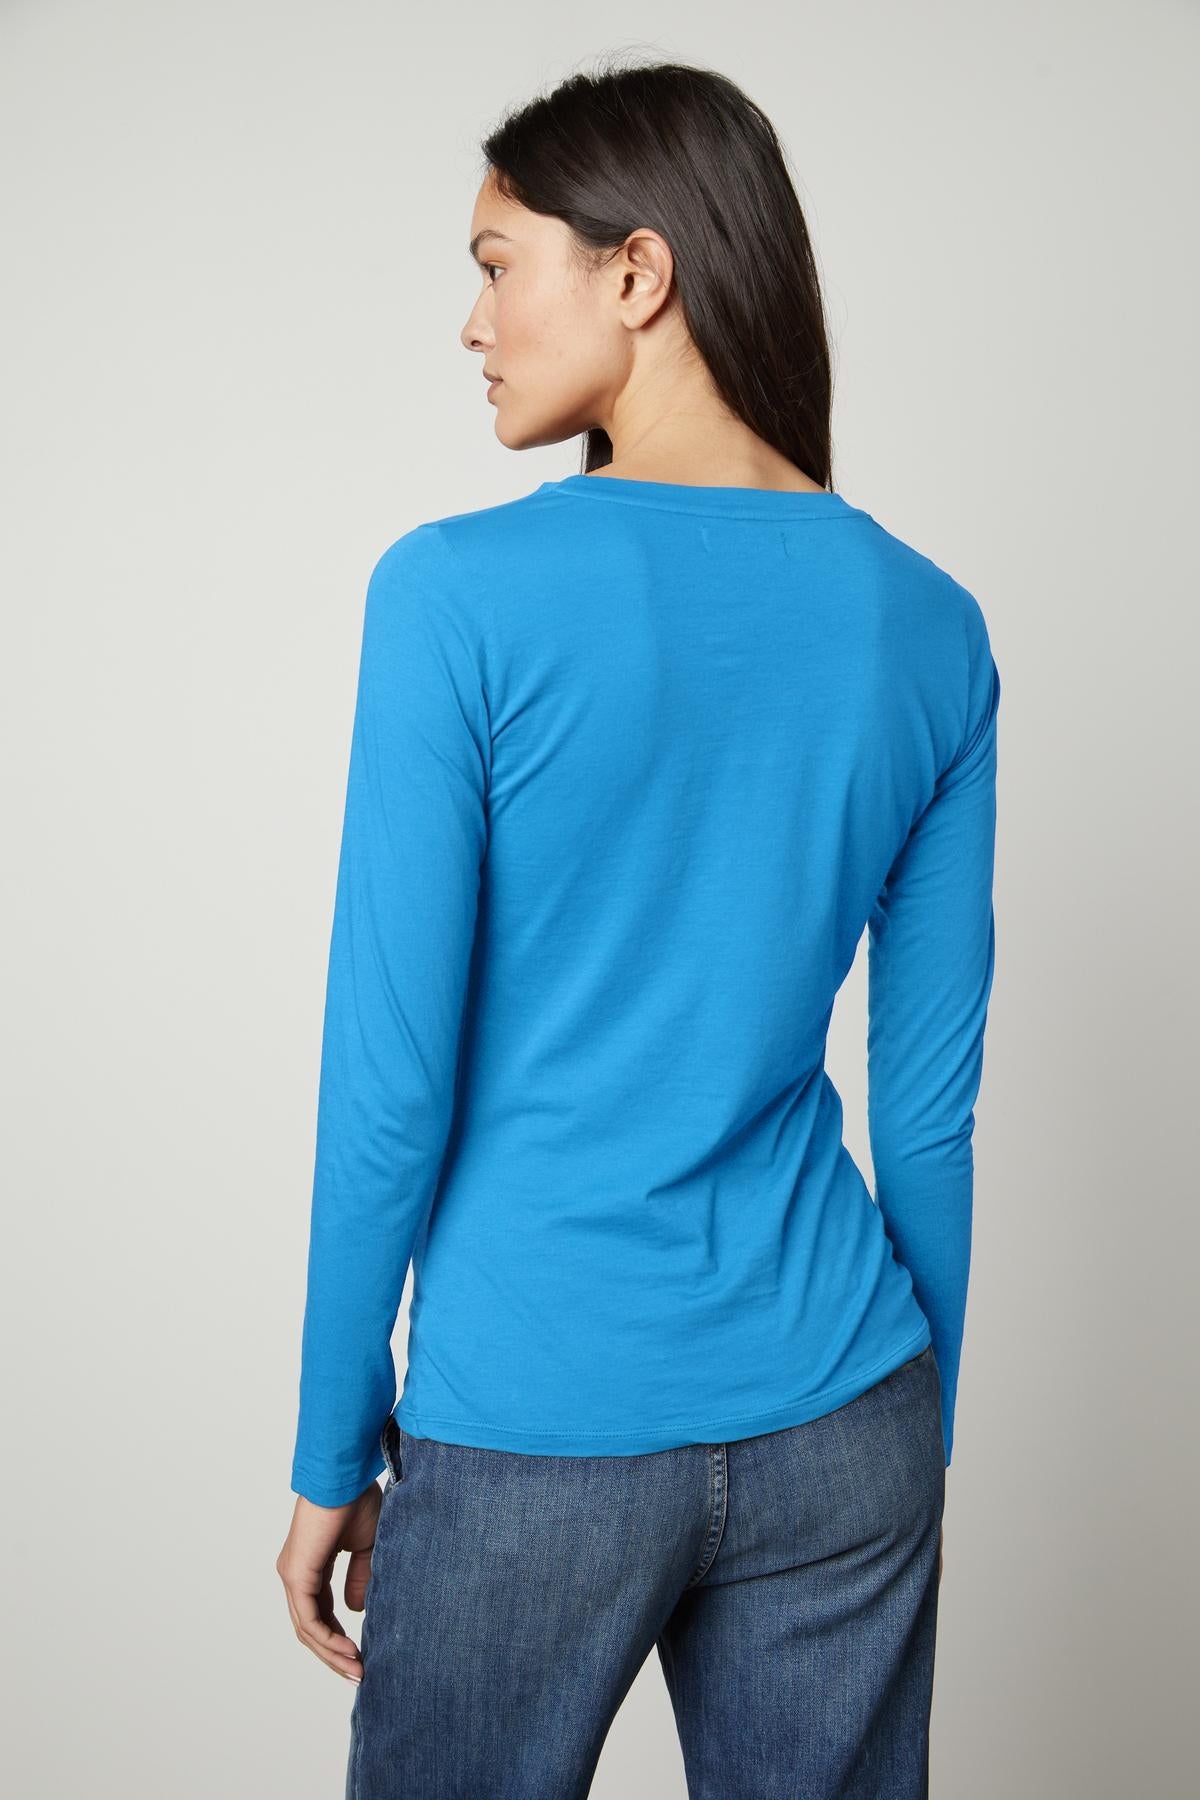 The back view of a woman wearing a Velvet by Graham & Spencer ZOFINA GAUZY WHISPER FITTED CREW NECK TEE, blue long-sleeve tee.-36594704875713